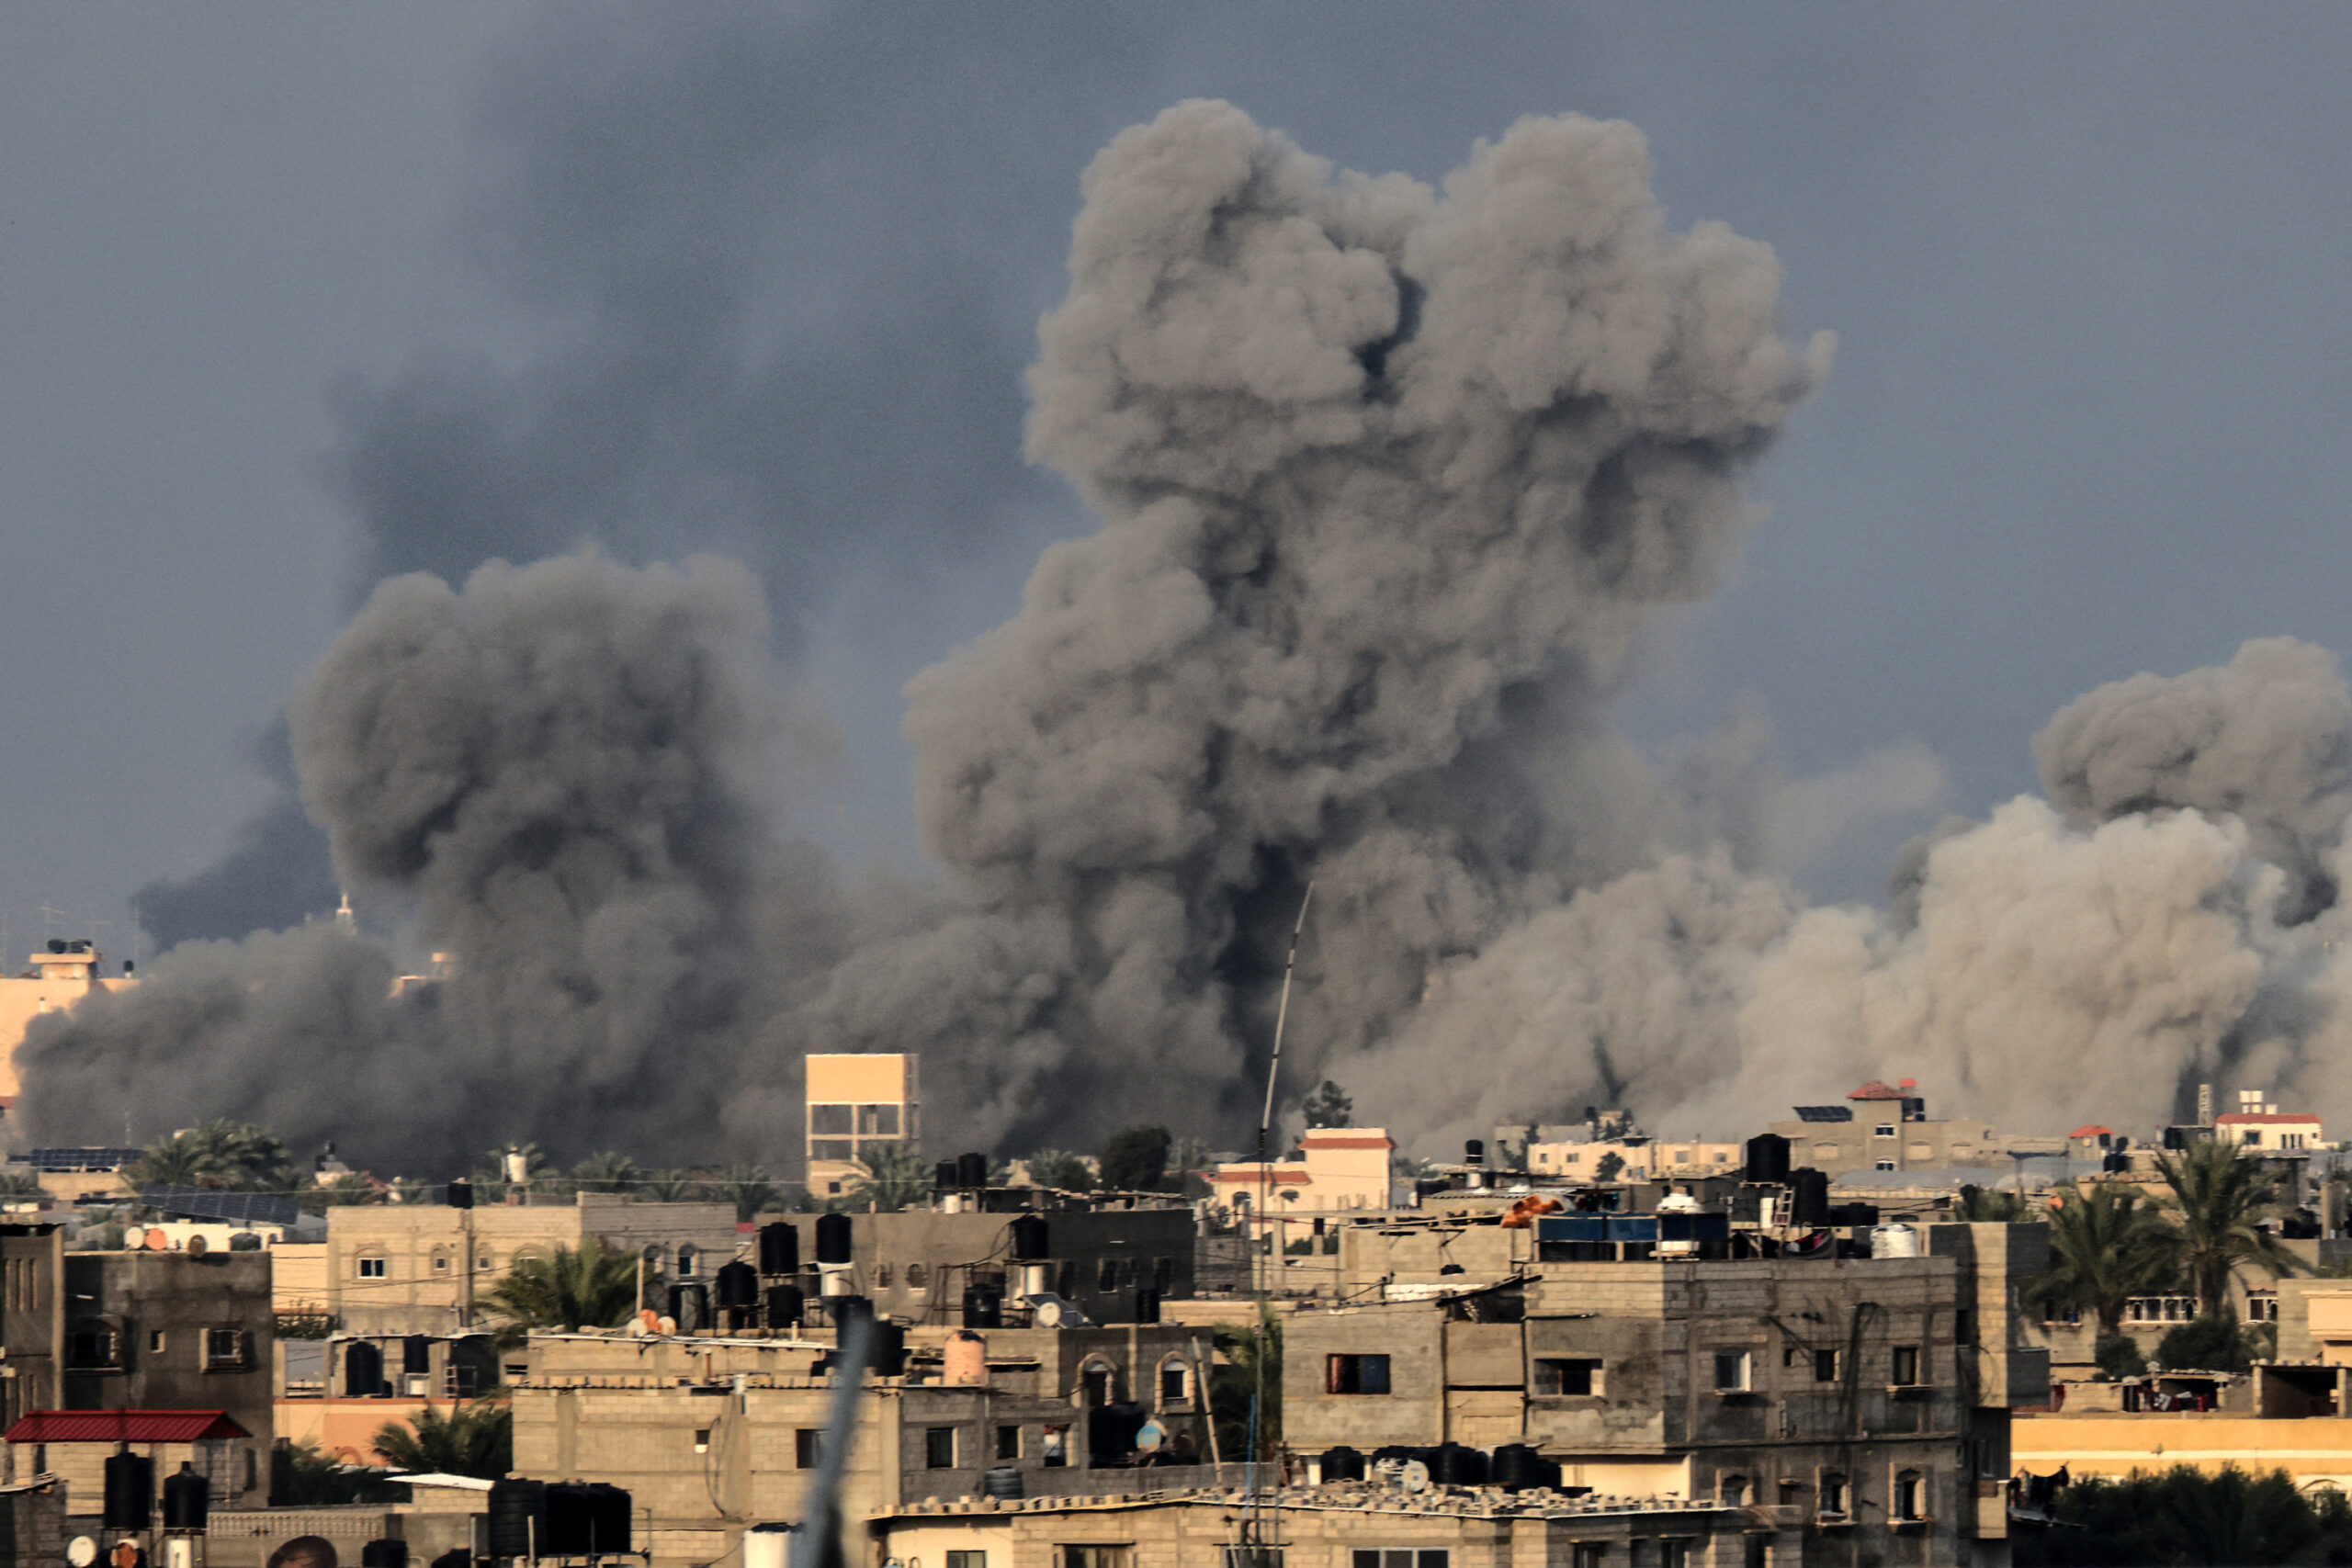 Unimaginable loss” in Gaza as people struggle to survive. Here’s the latest on the conflict